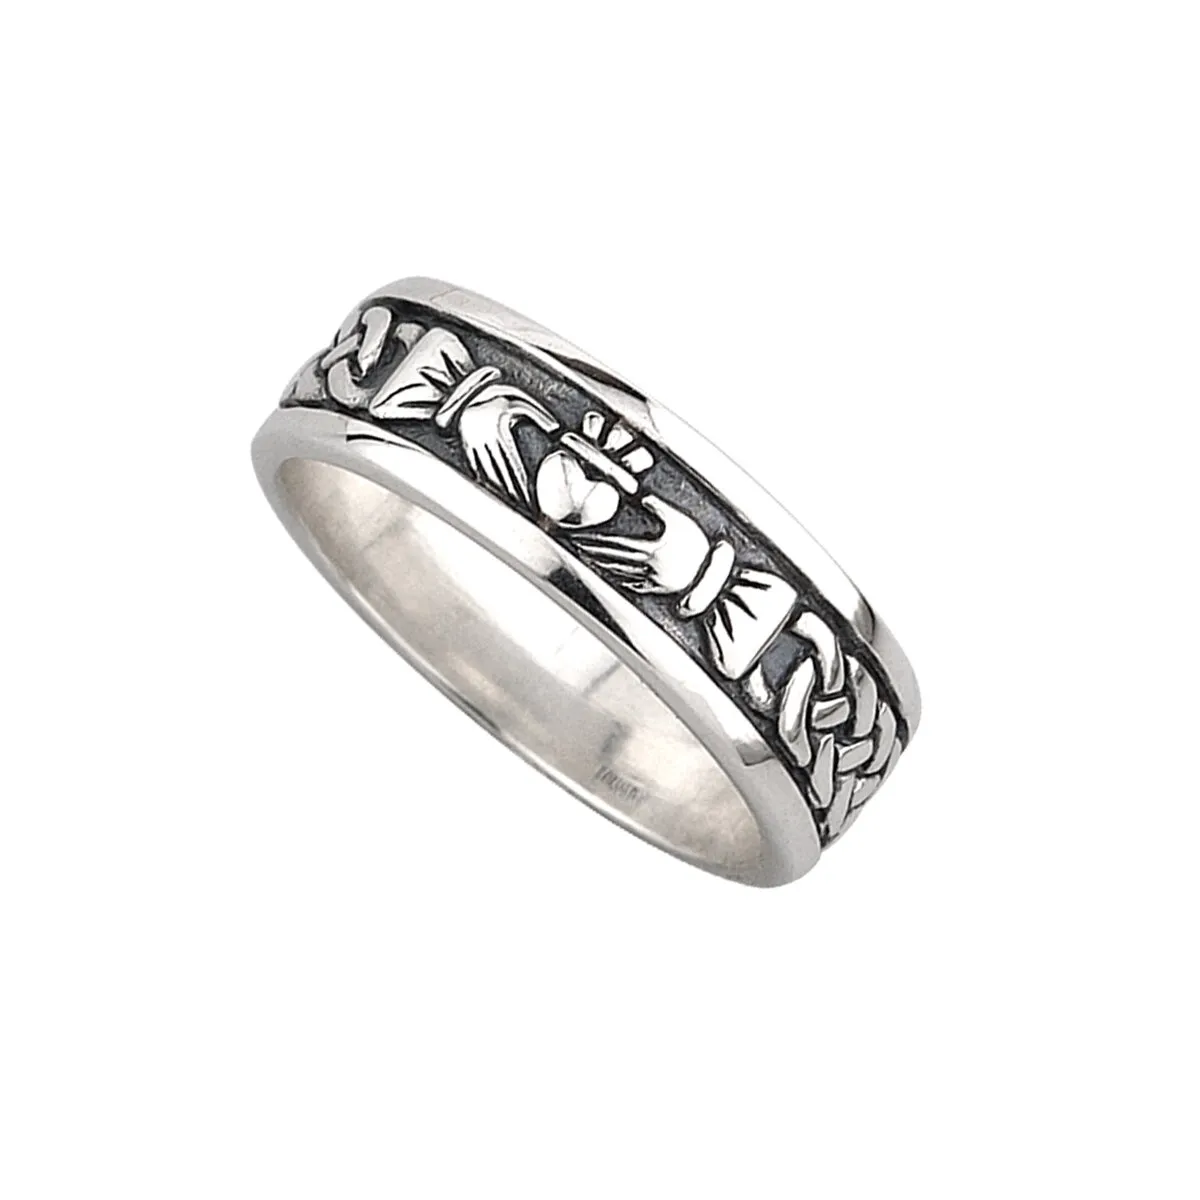 Mens Sterling Silver Oxidised Claddagh Ring0...